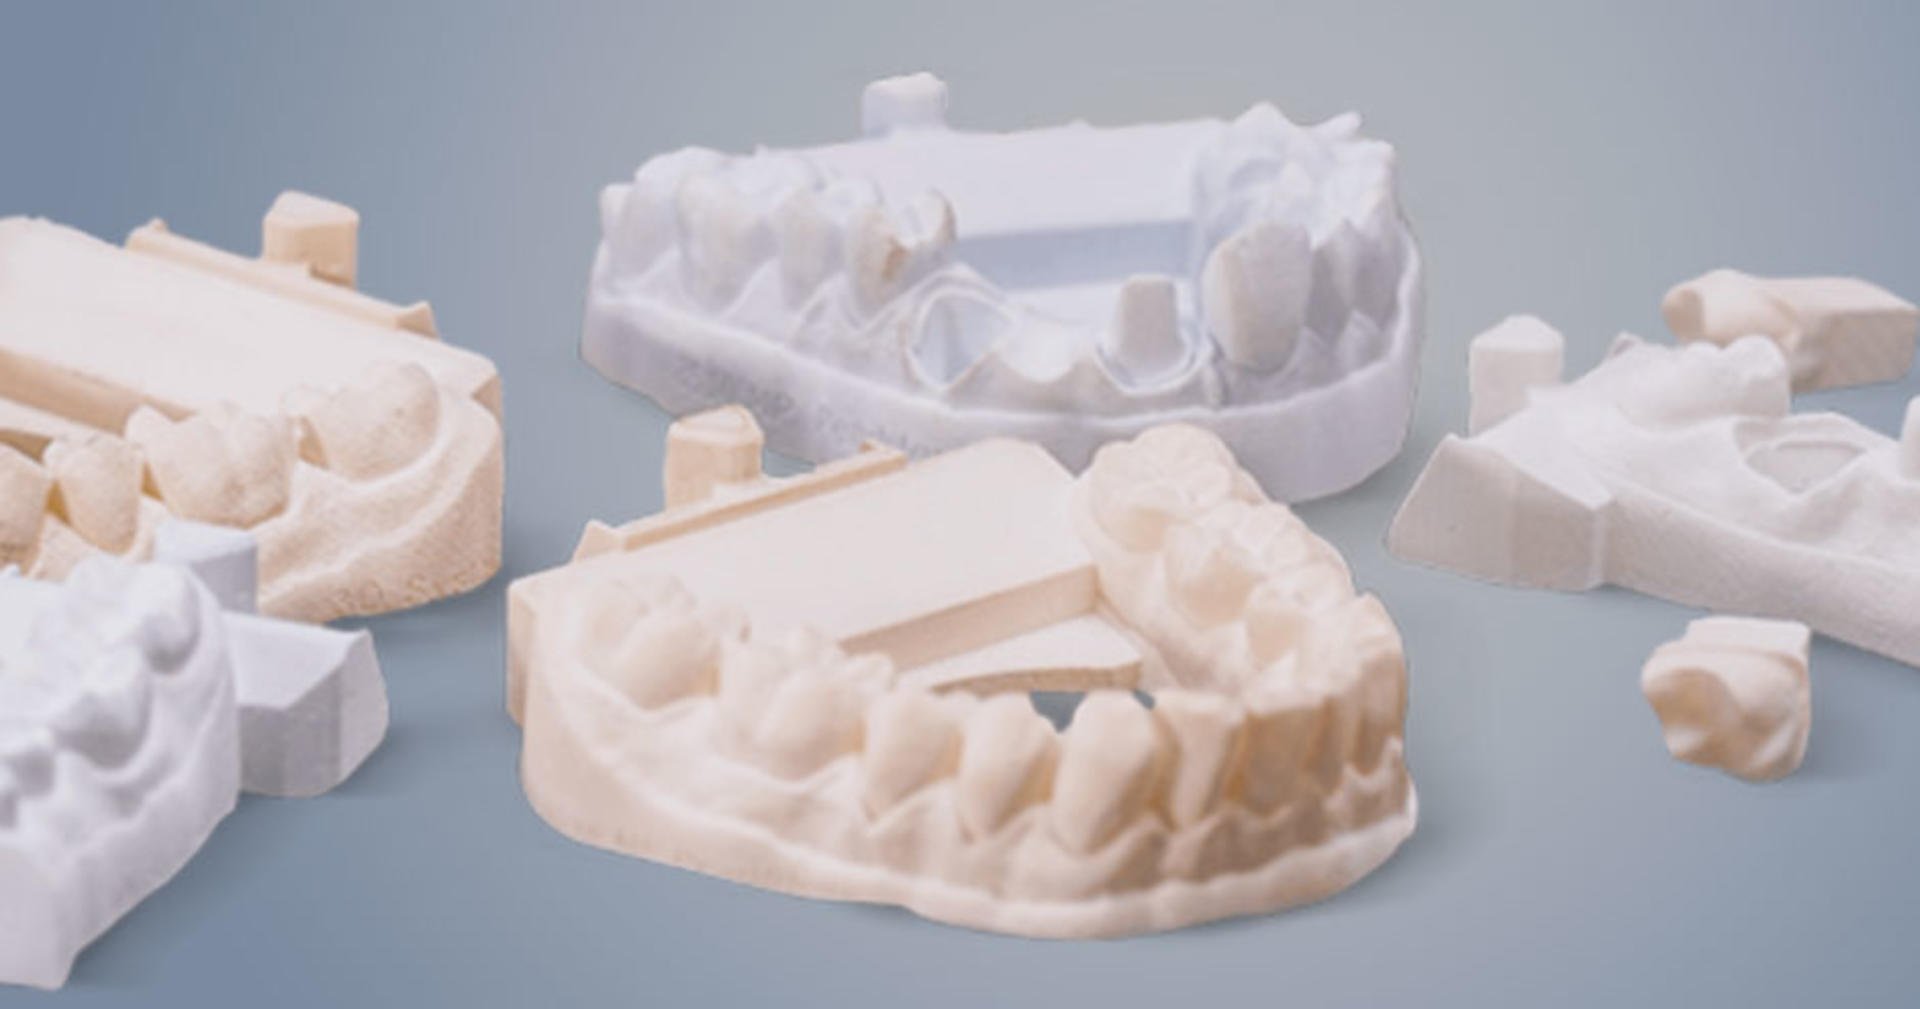 dental materials plastic 3d systems printing changing